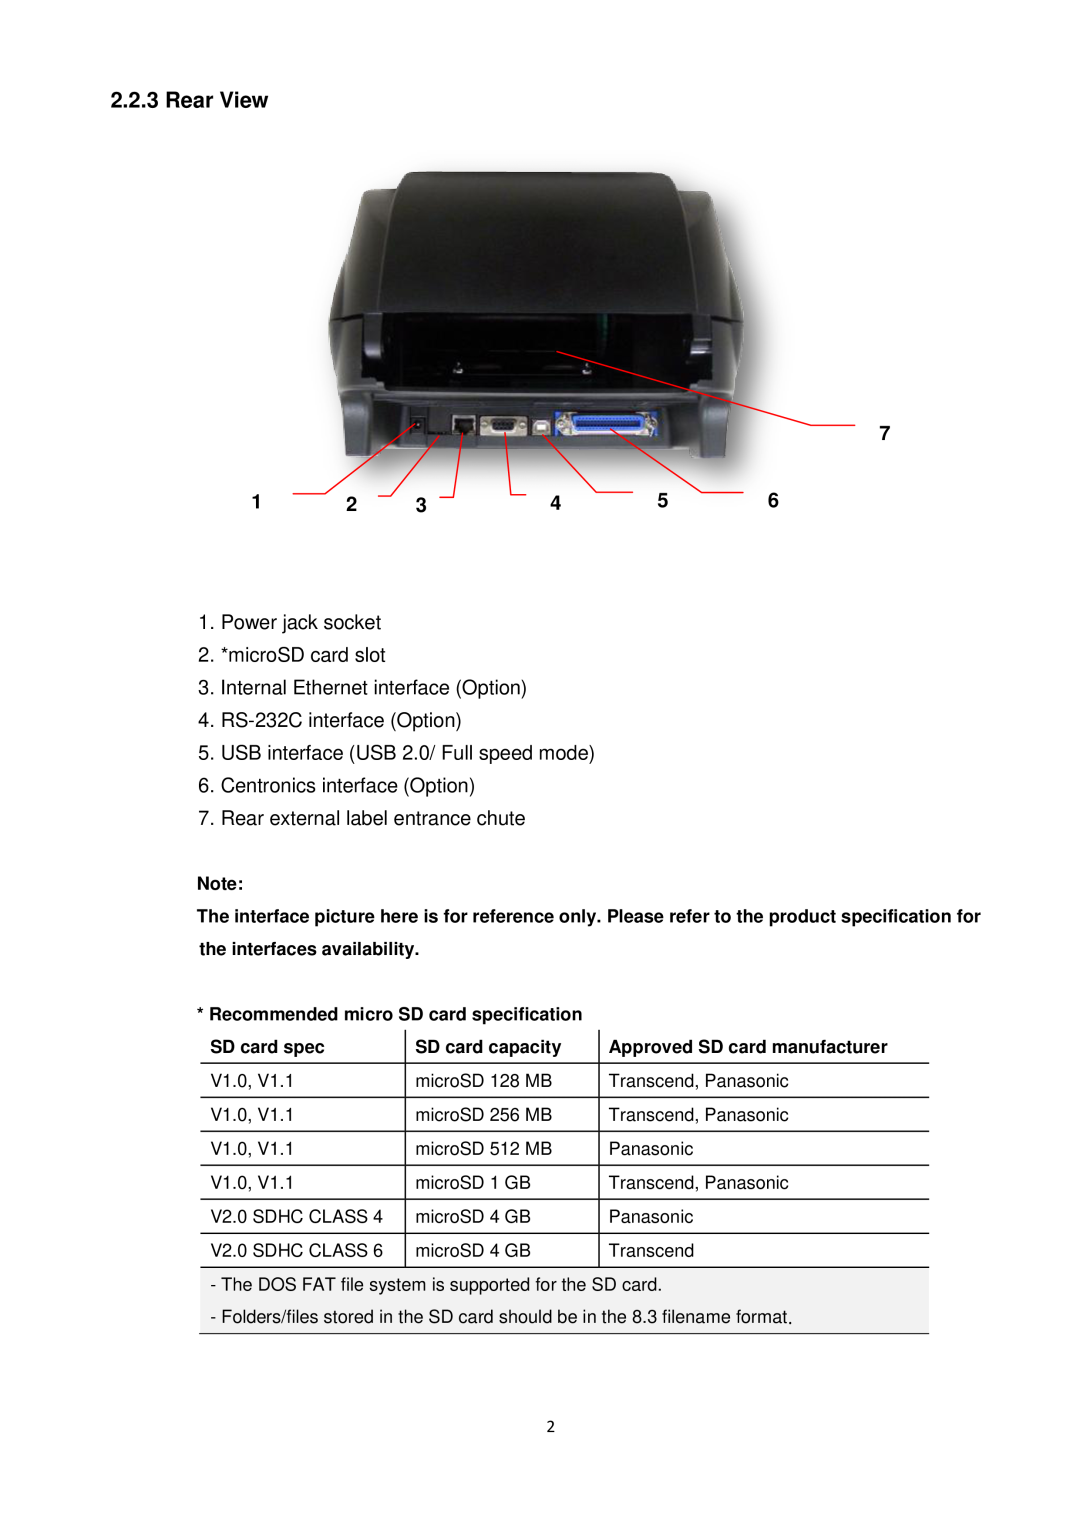 The Speaker Company ta200 manual Rear View, Recommended micro SD card specification, SD card capacity 